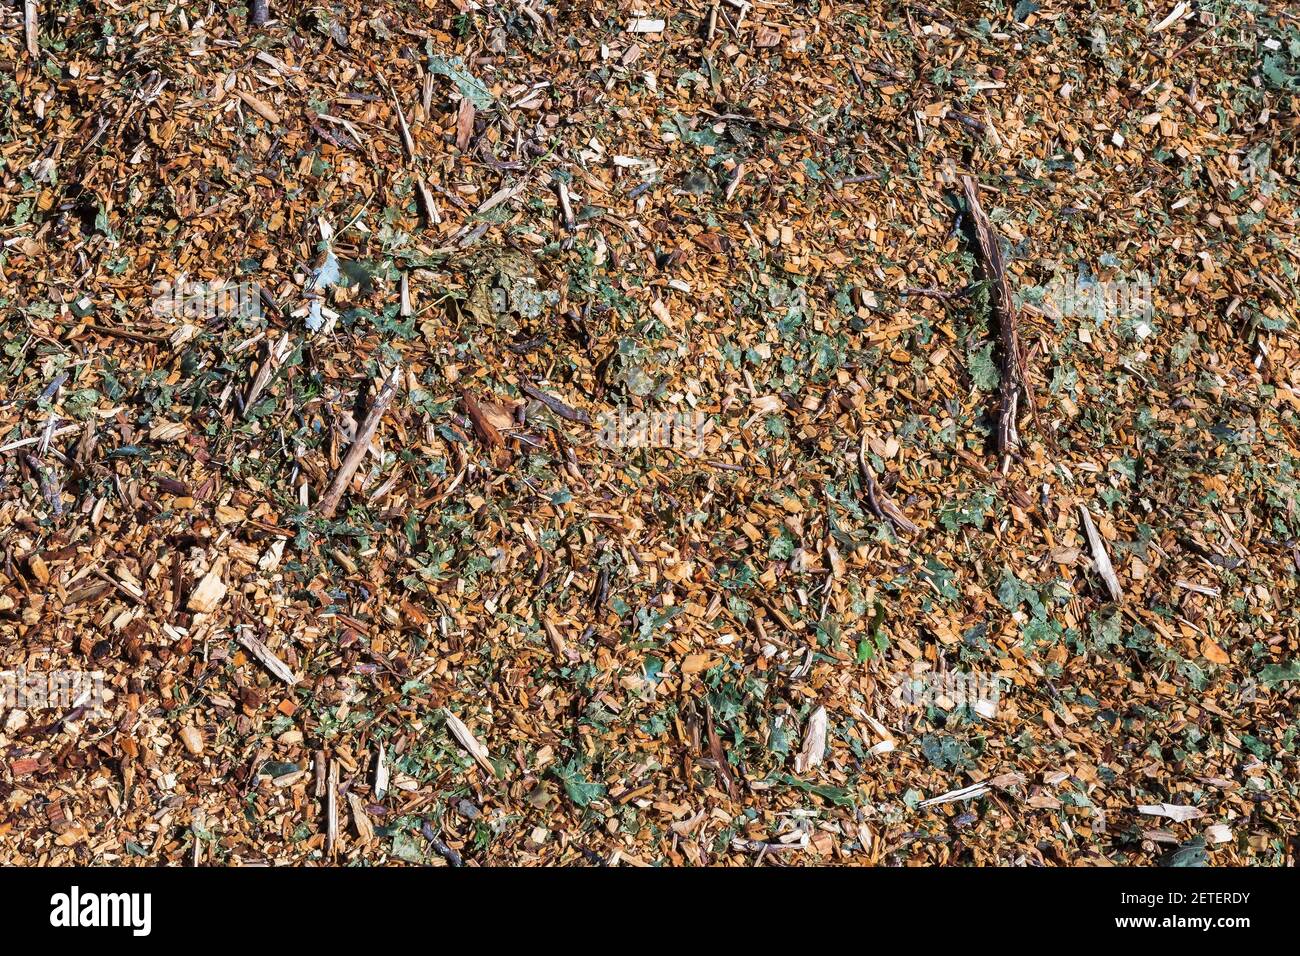 Close-up of mound of mulch made from wood chips, leaves and twigs Stock Photo